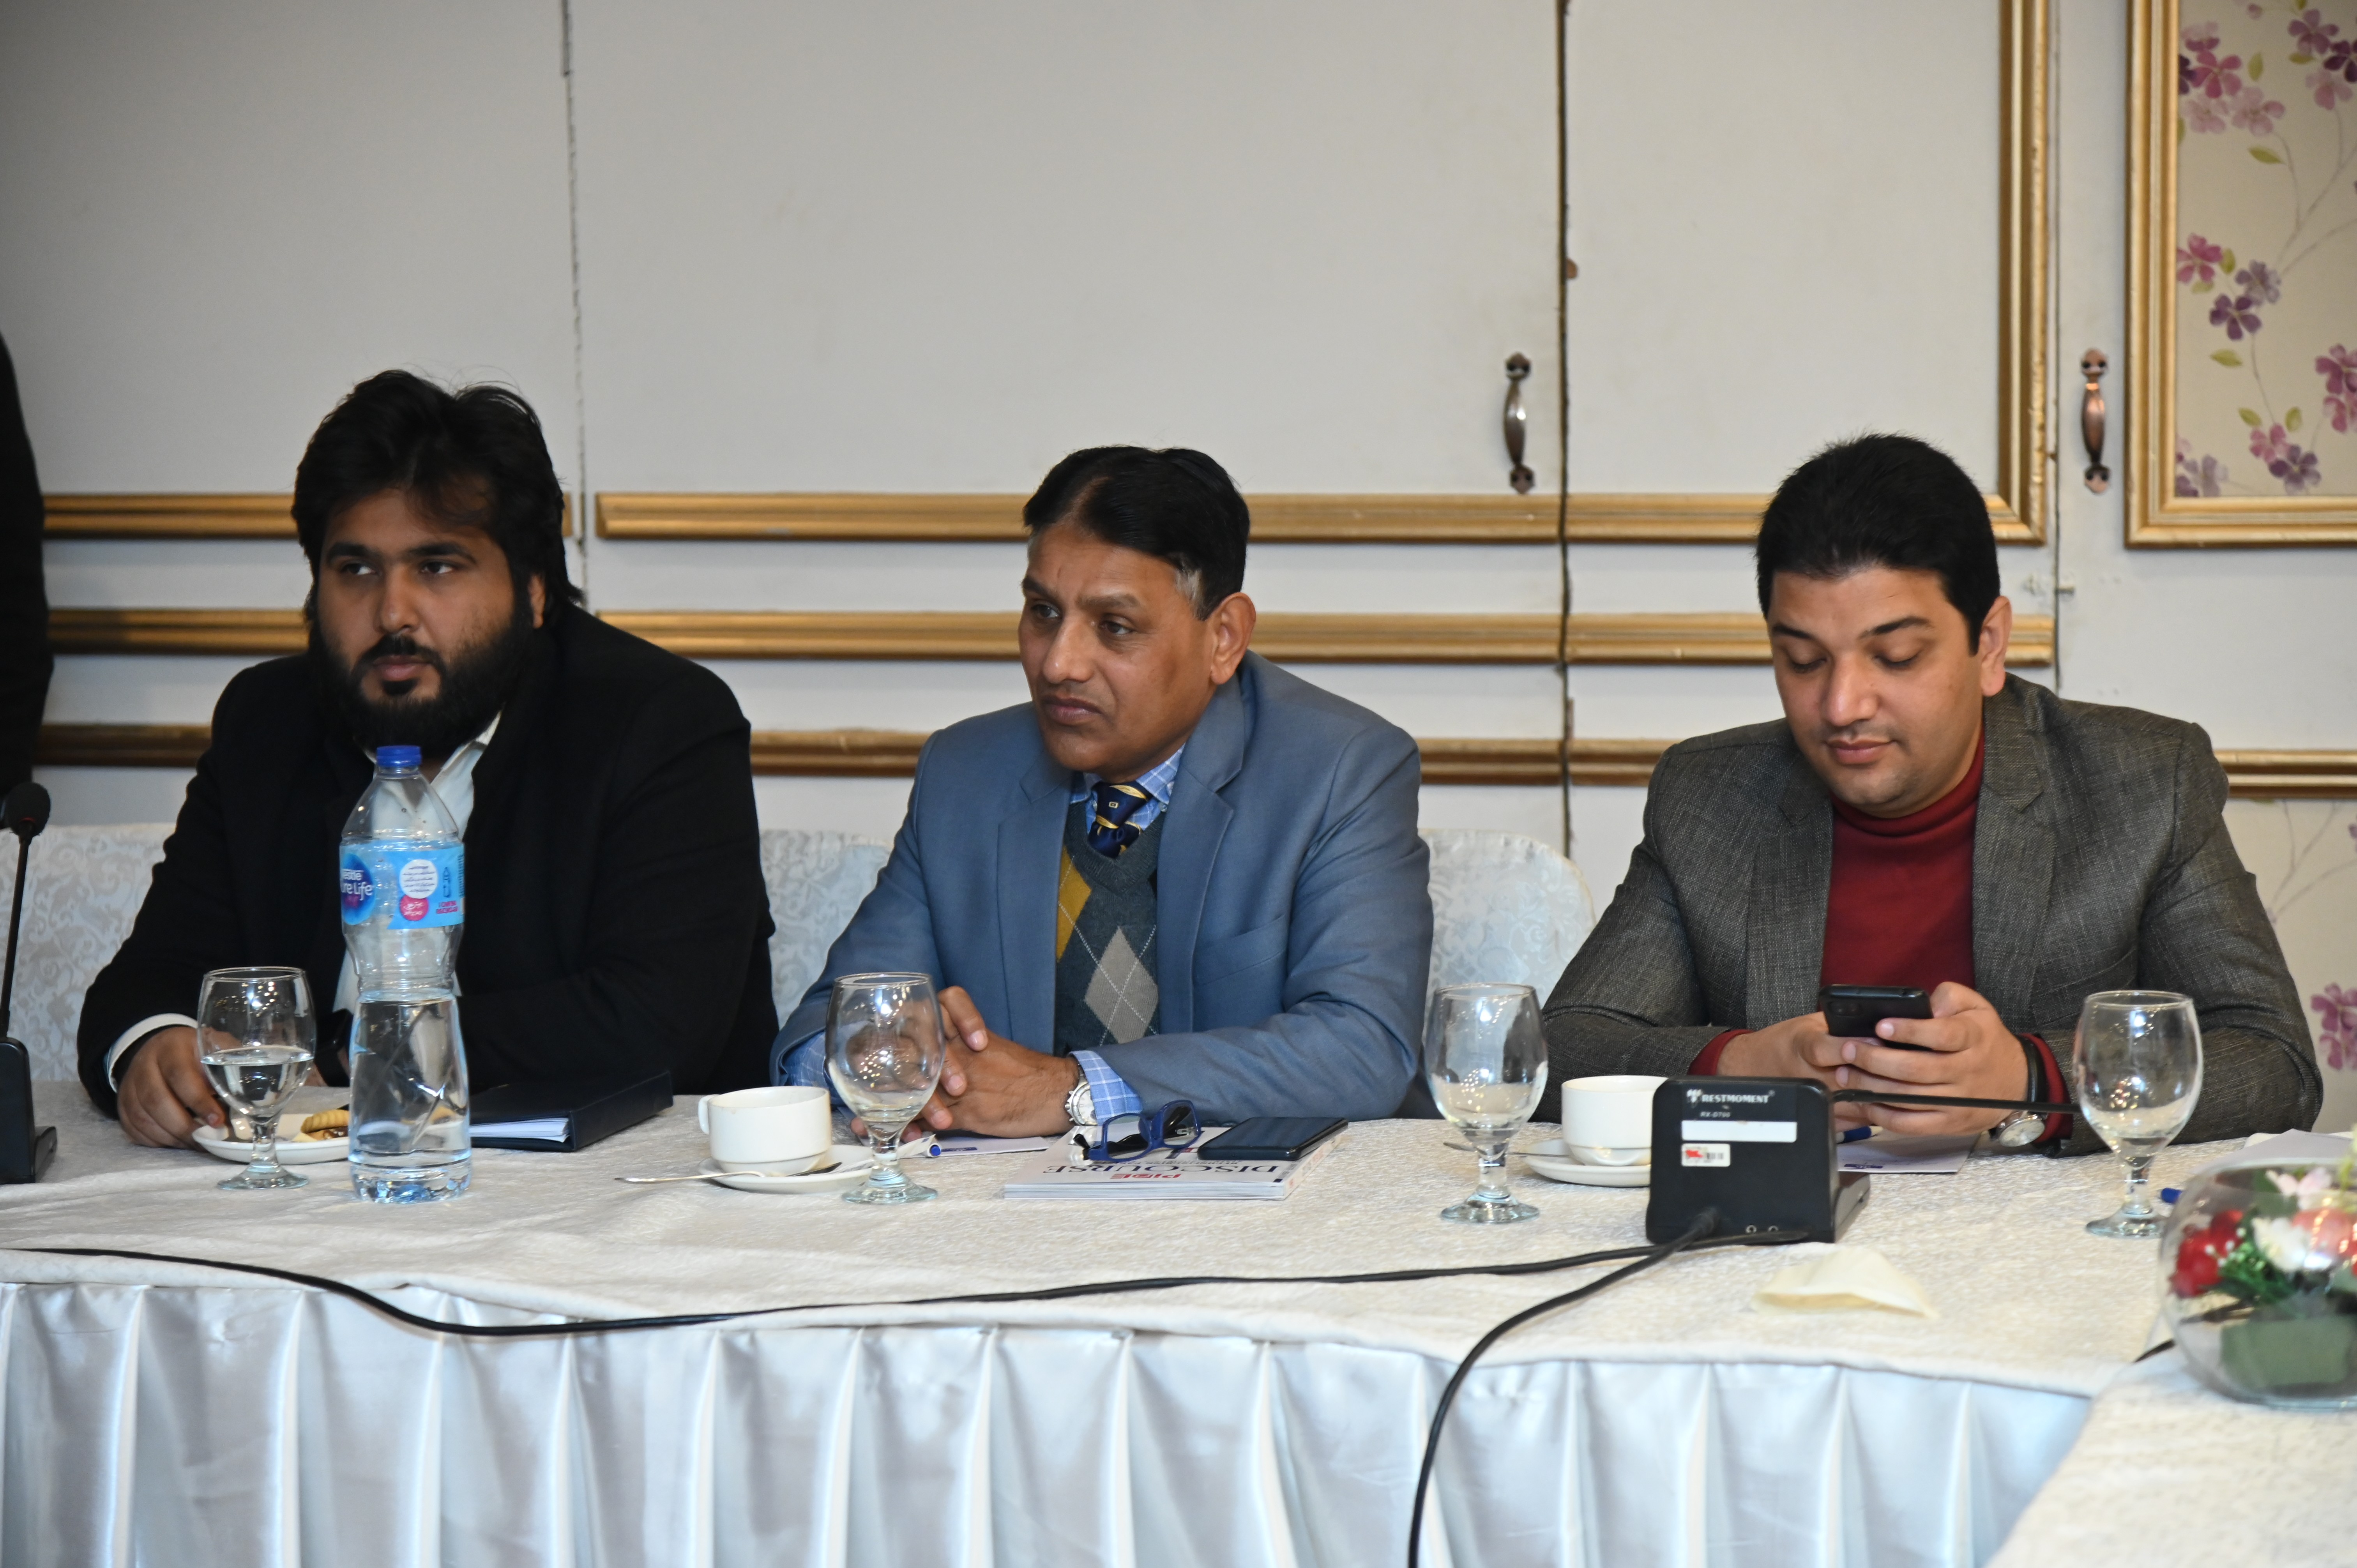 The Discussion session organized by  PIDE at Islamabad Hotel on the 4th Think Tank Moot, adressing the local challenges and exploring ways to transform our economy and society